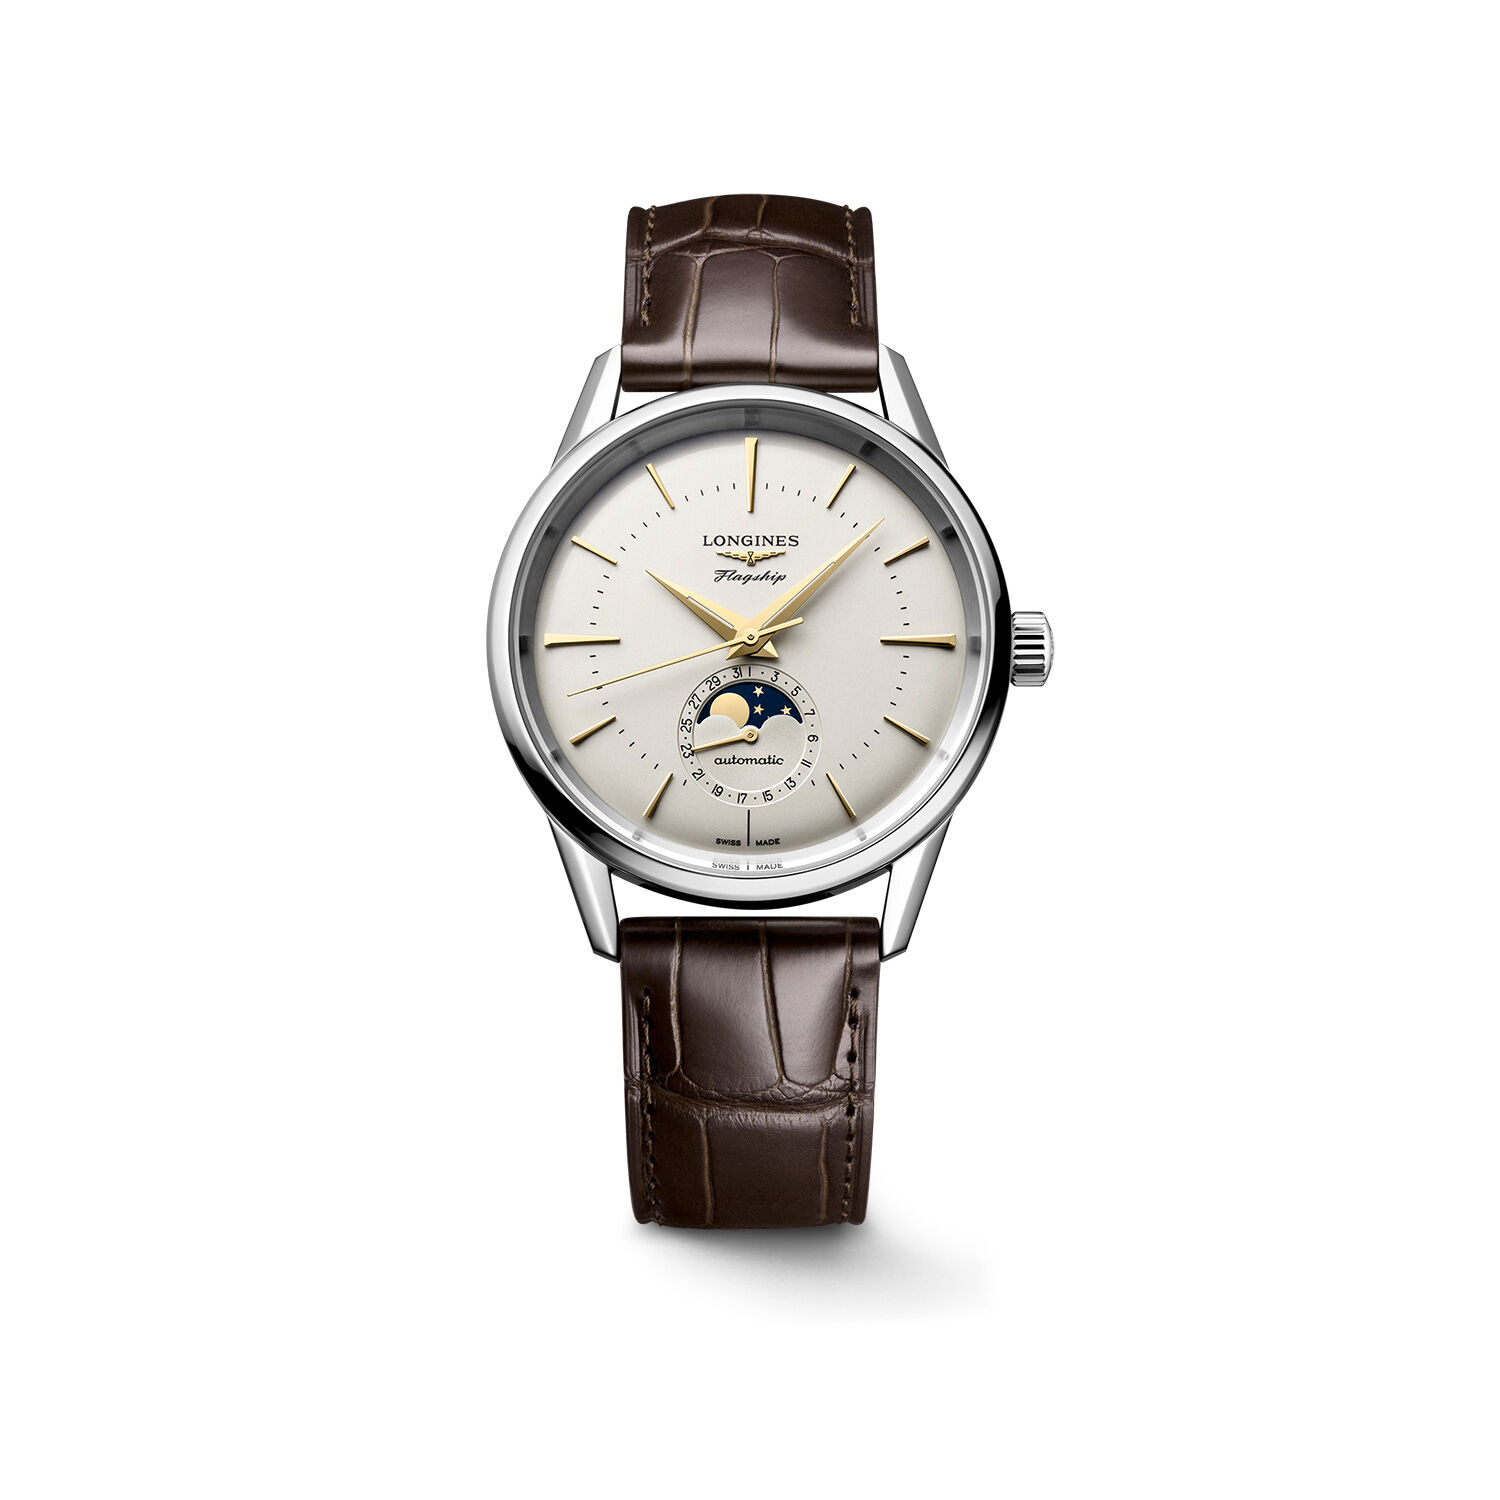 Longines Flagship Heritage automatic moon phase watch